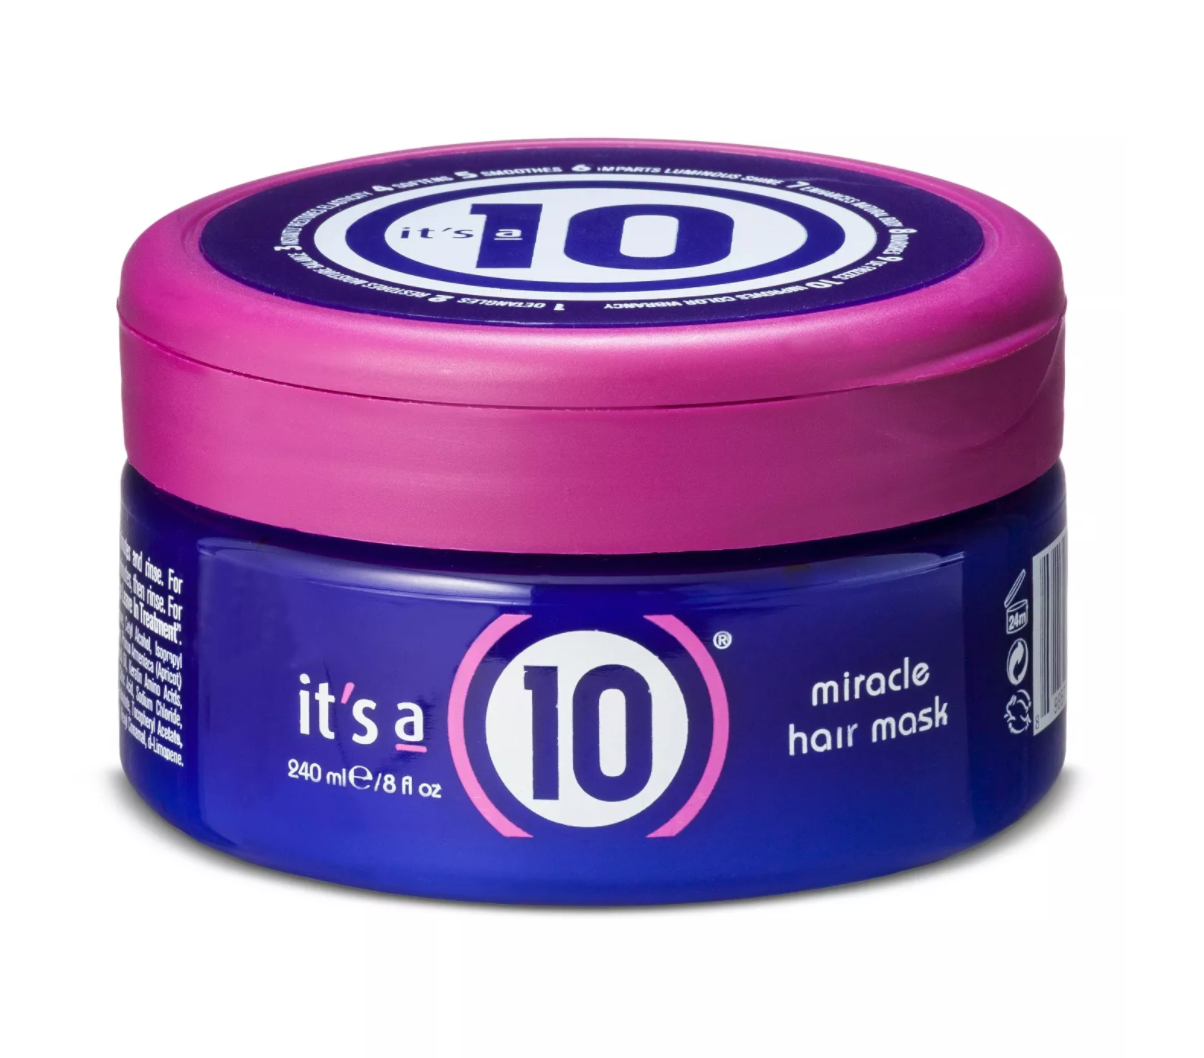 it's a 10 miracle hair mask